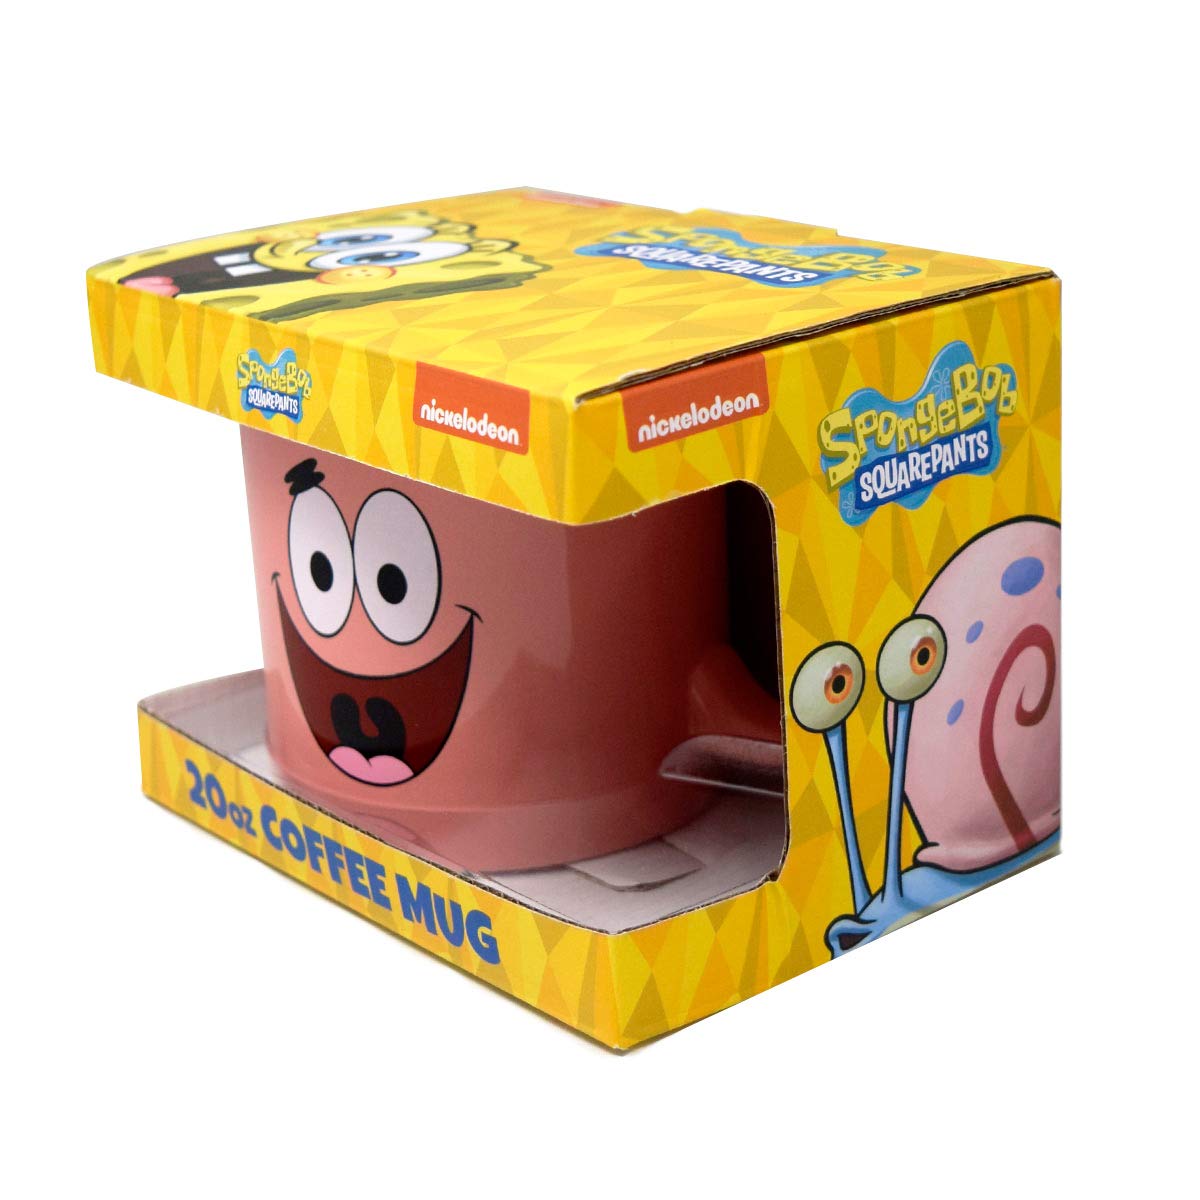 Patrick Officially licensed Big Face Jumbo 20 oz Coffee Mug - Perfect for coffee lovers and SpongeBob SquarePants fans!